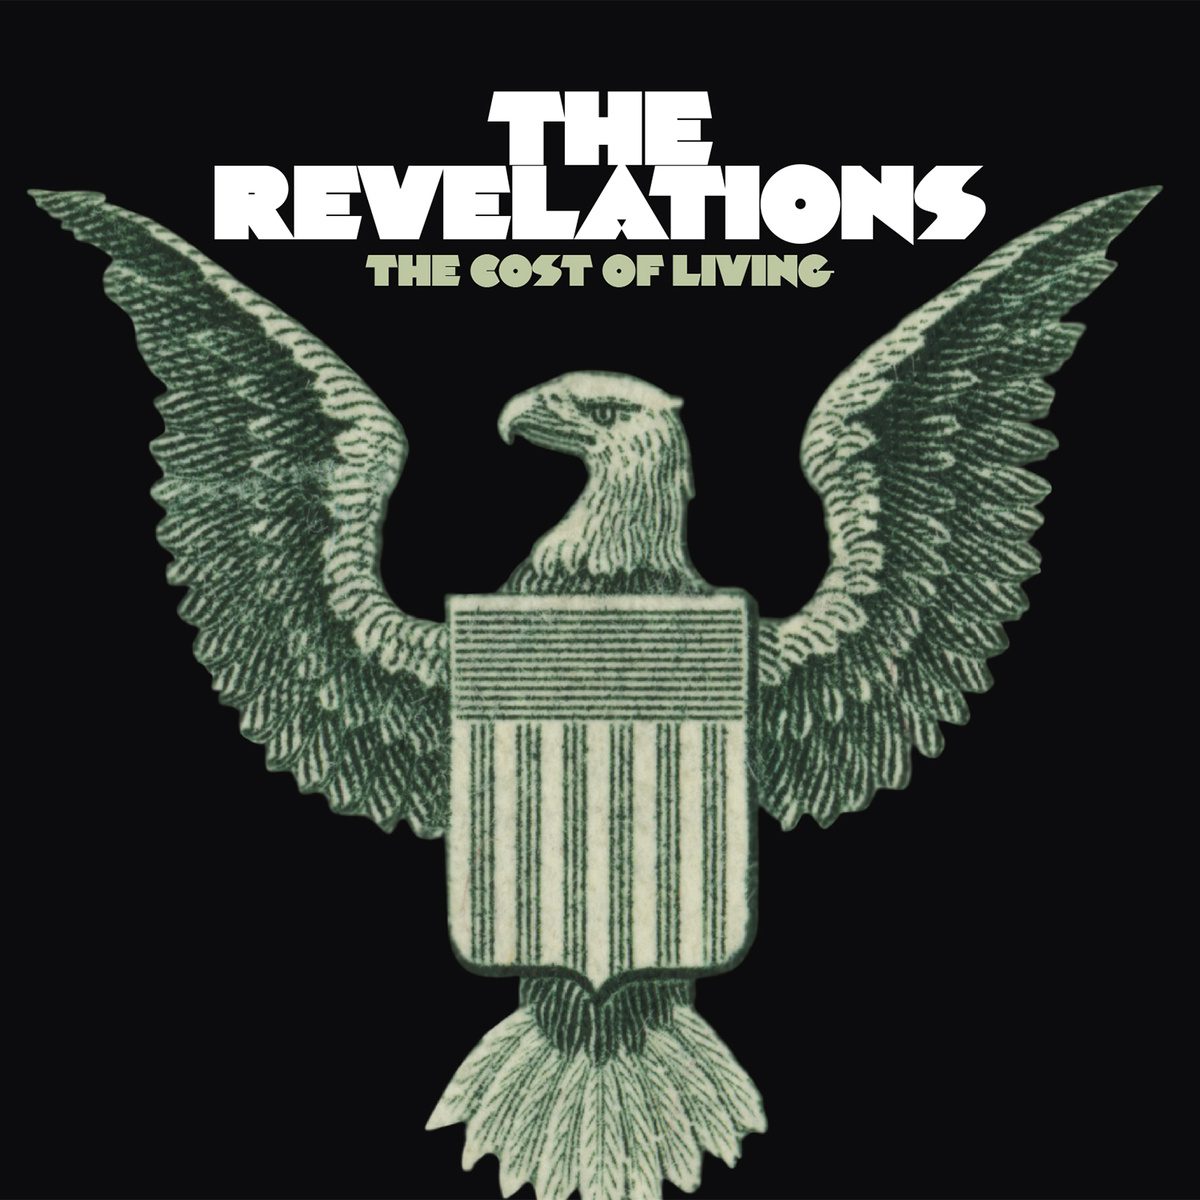 The Revelations - The Cost of Living ALBUM REVIEW + FULL STREAM + FREE MP3 DOWNLOAD @the_revelations